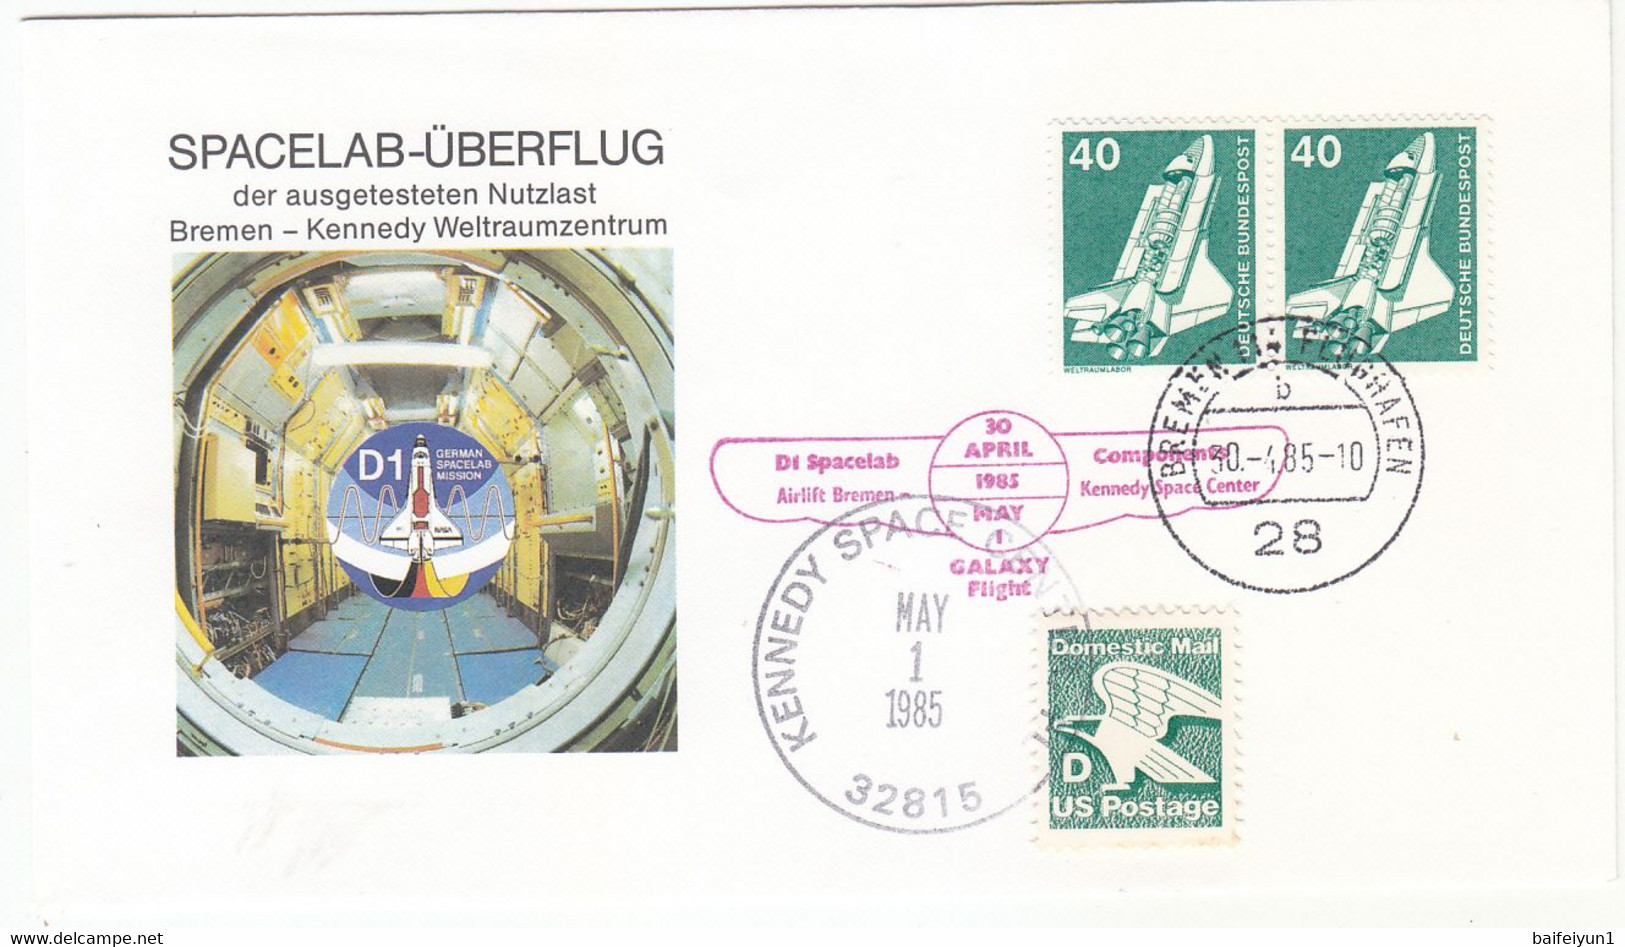 1985 USA  Space Shuttle Challenger STS-51B  Mission And Spacelab  Commemorative Cover - Amérique Du Nord